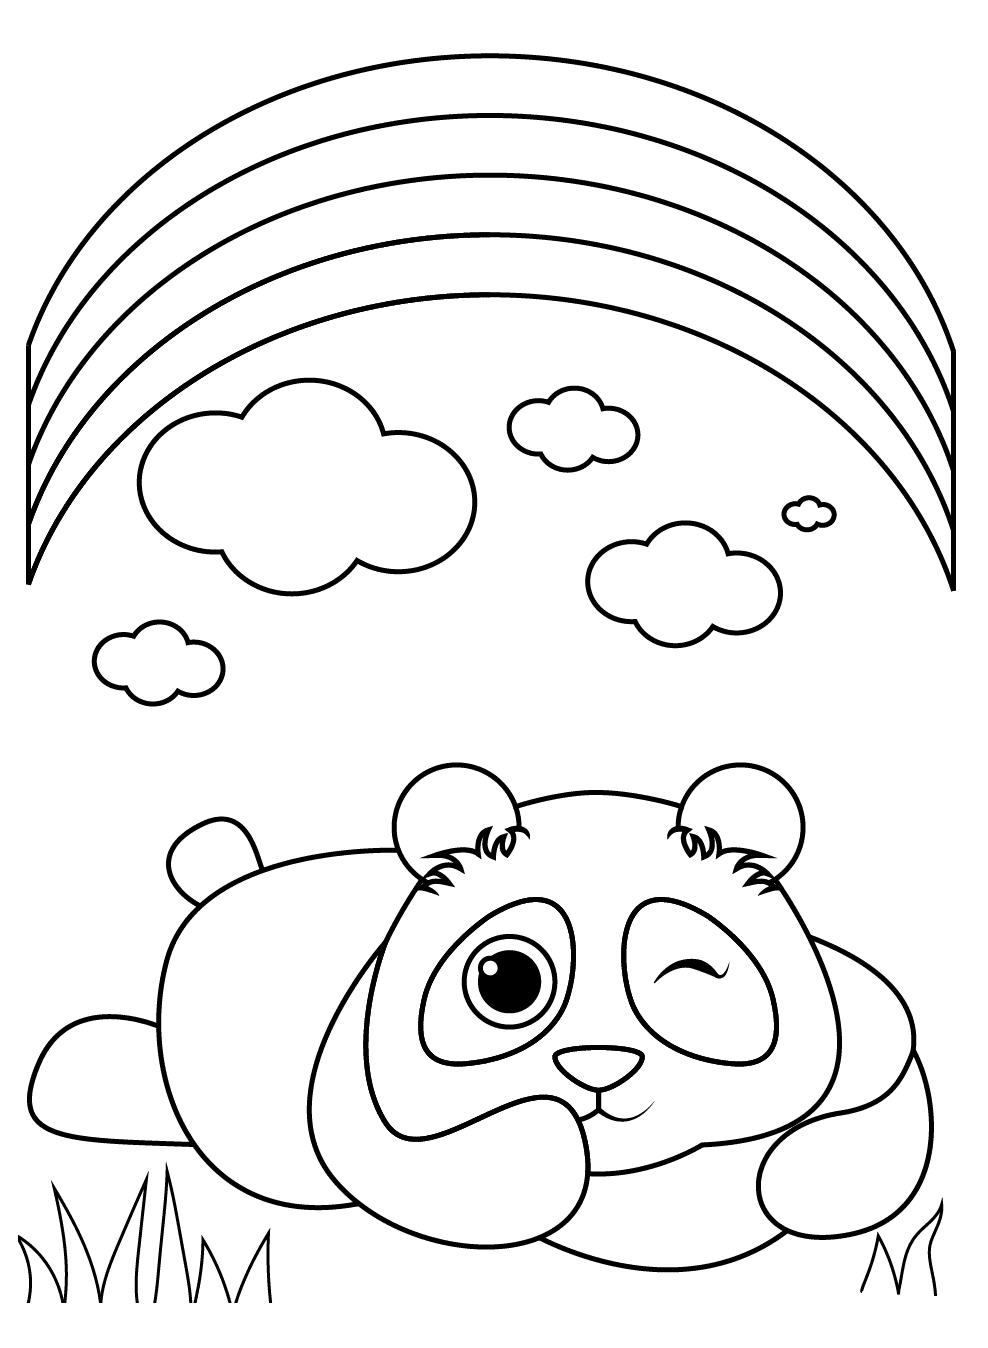 Cute Winking Panda Coloring Pages